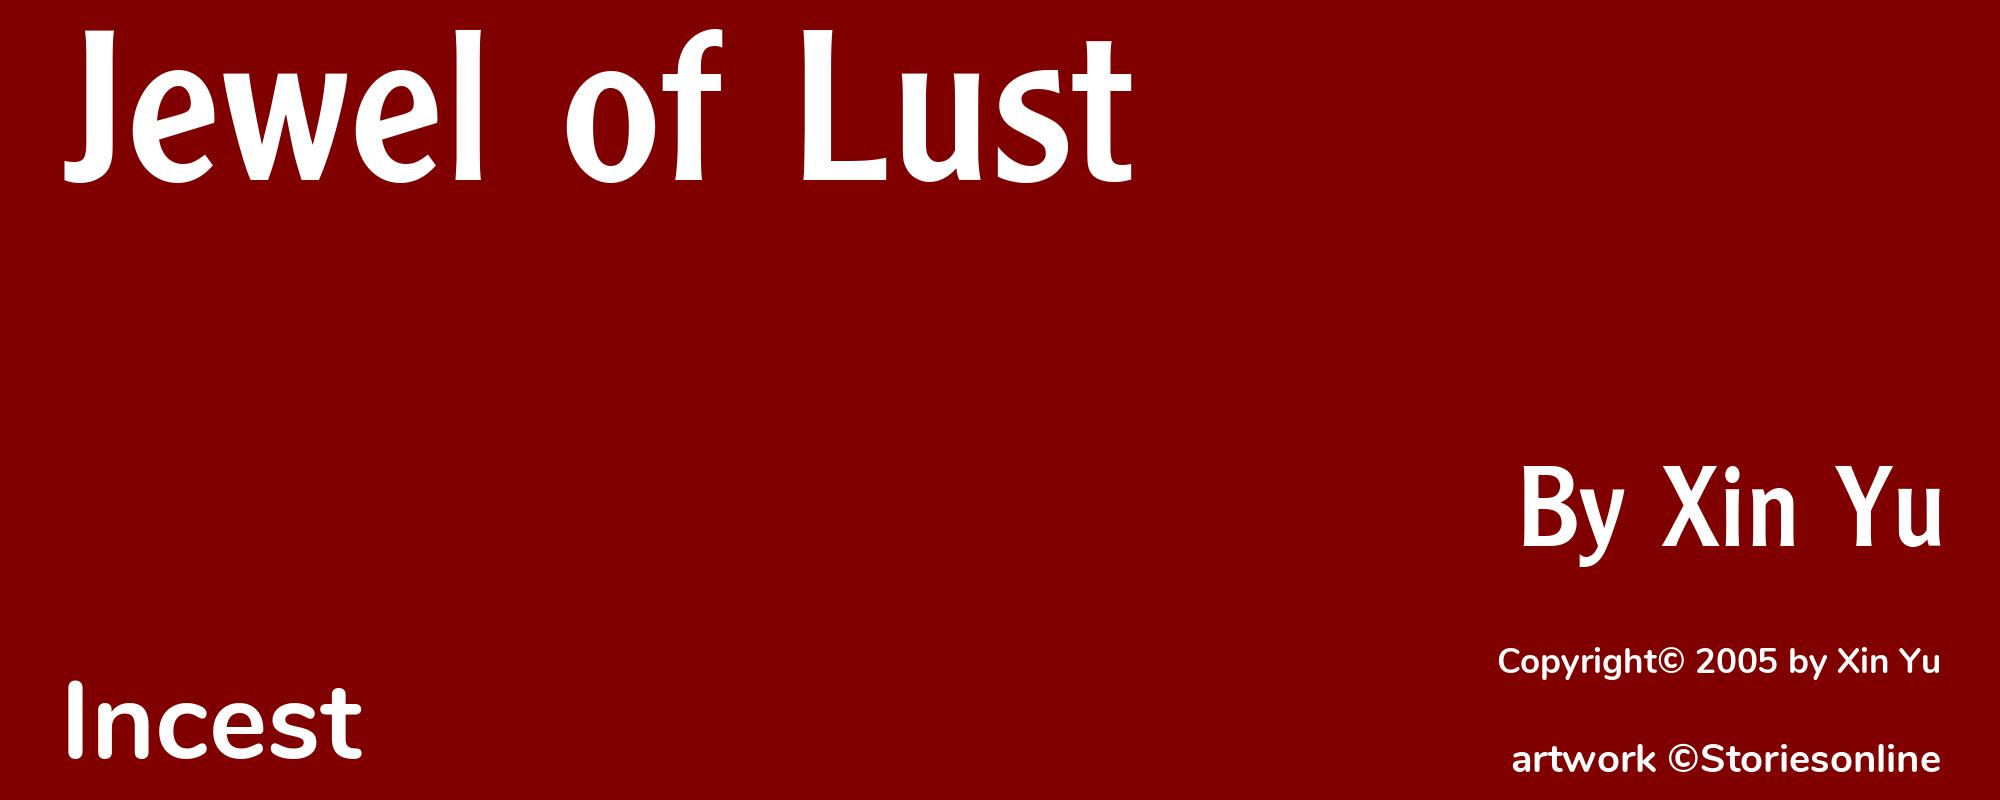 Jewel of Lust - Cover